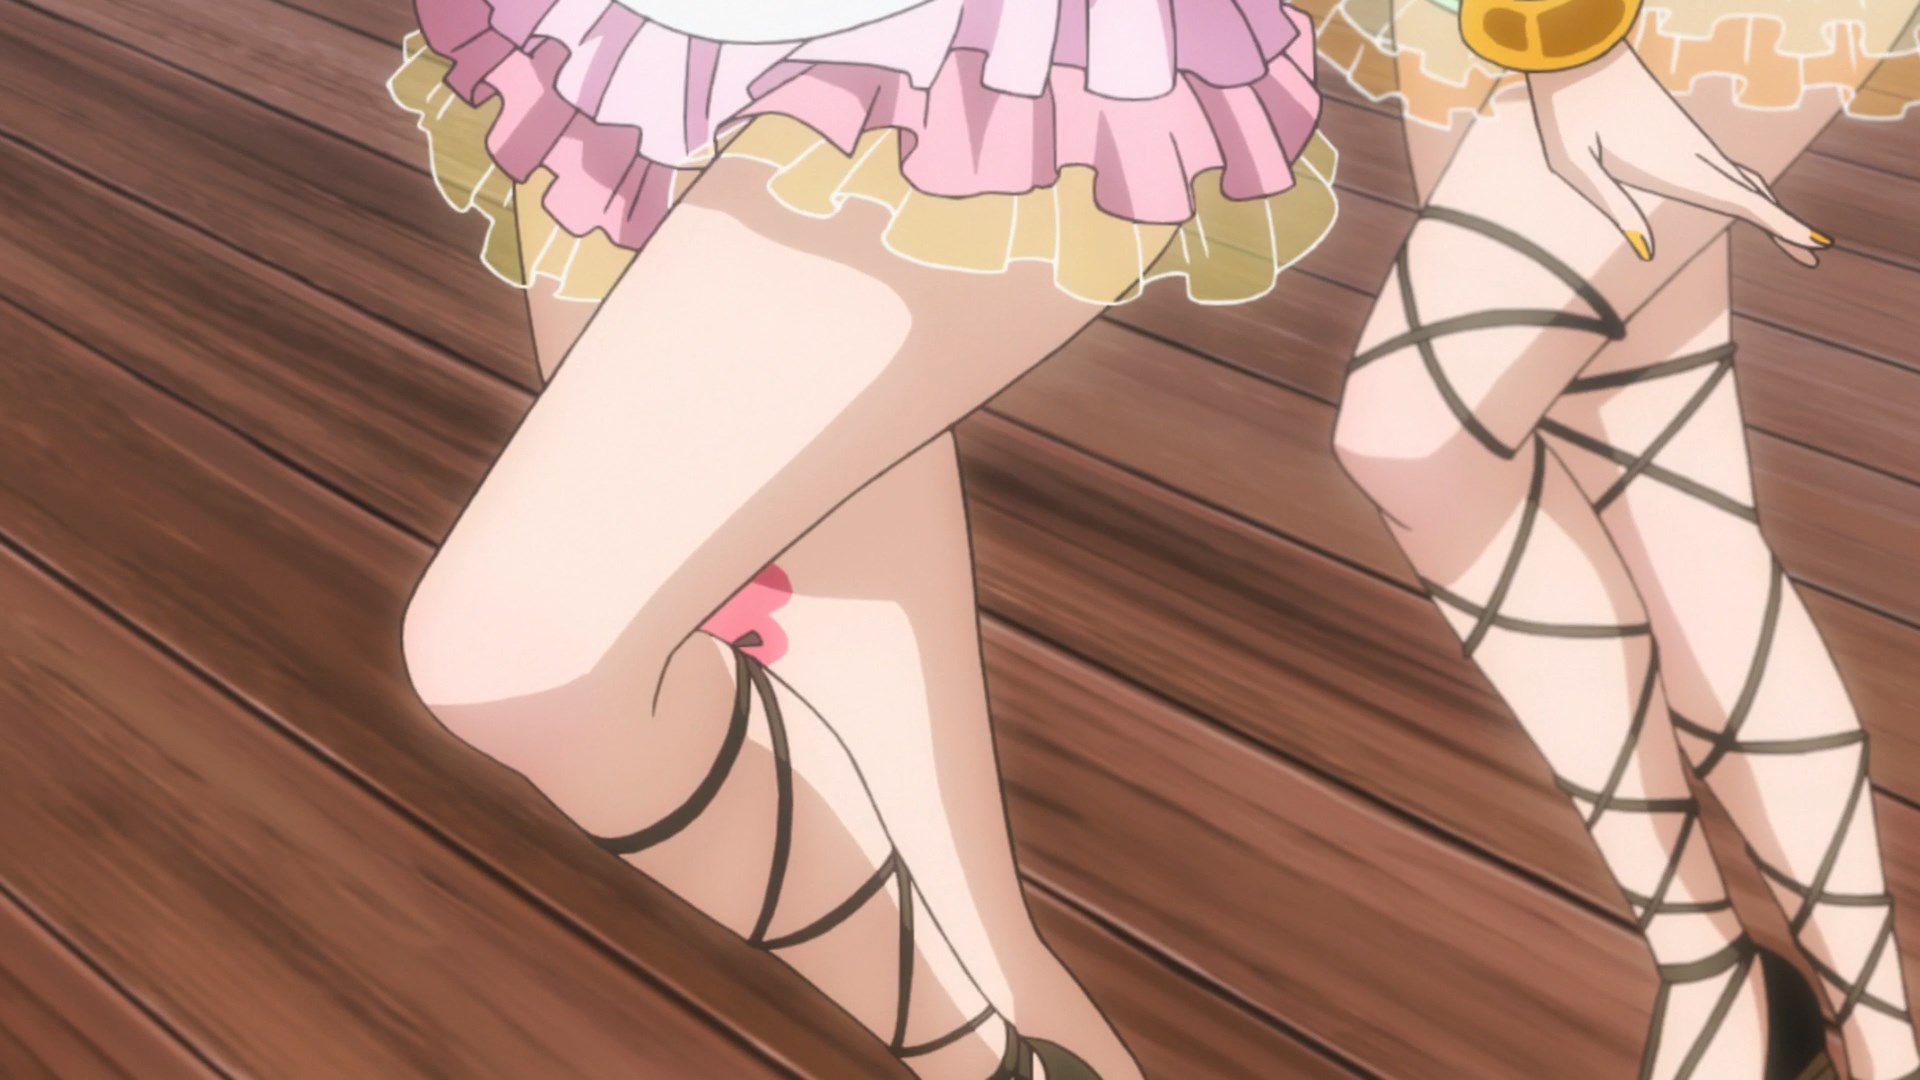 [God images] "love live! ' Μm ' PV's leg is too erotic everyone wakes up to a leg fetish of wwwww 13